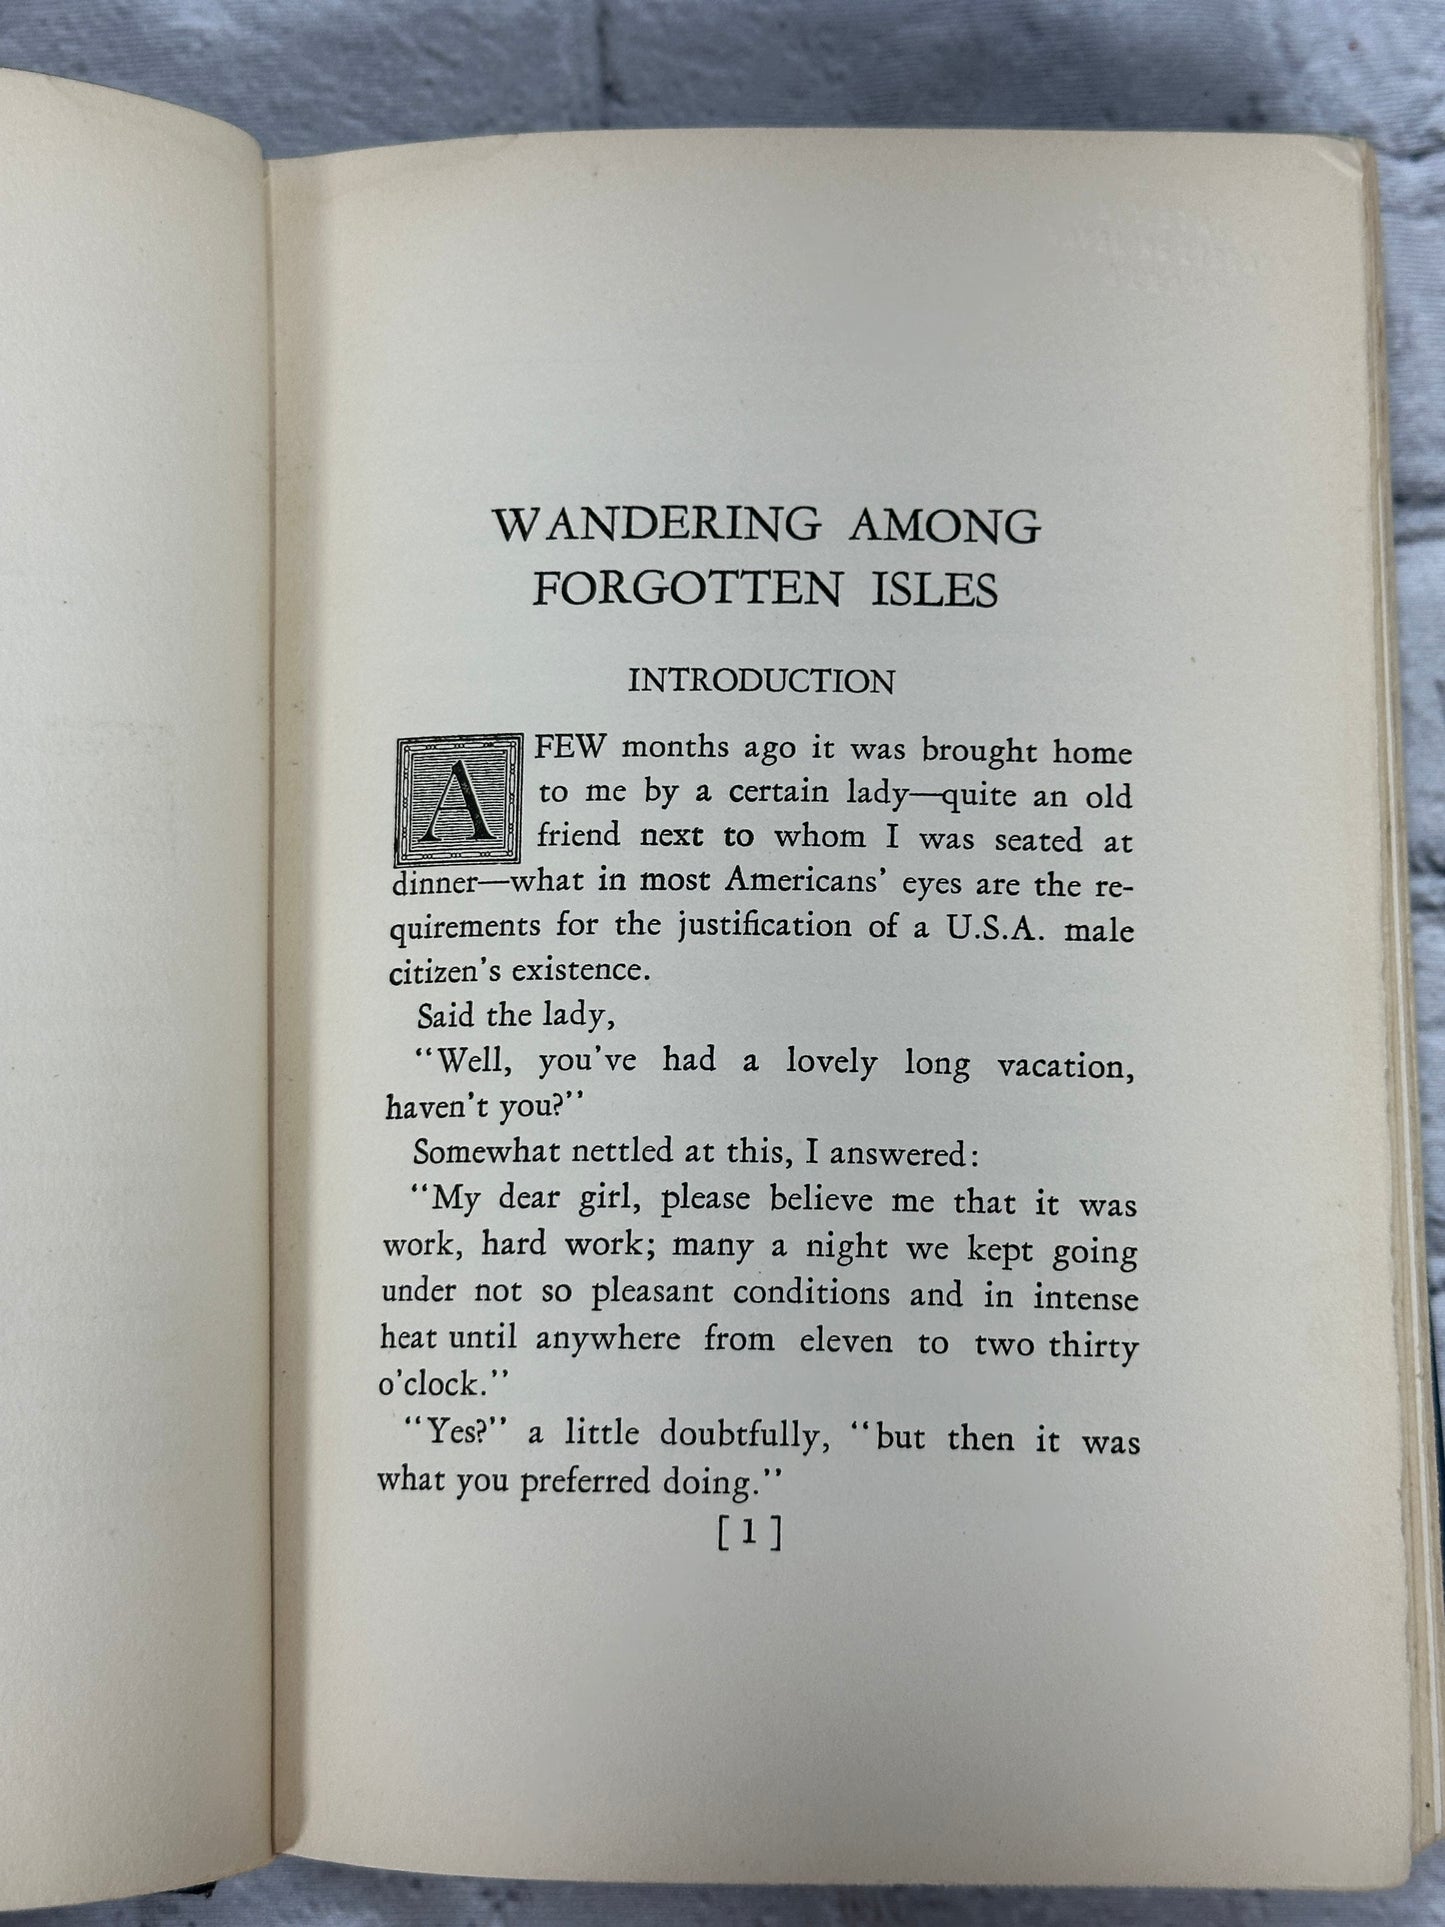 Wandering Among Forgotten Isles by Jesse Metcalf [1927]